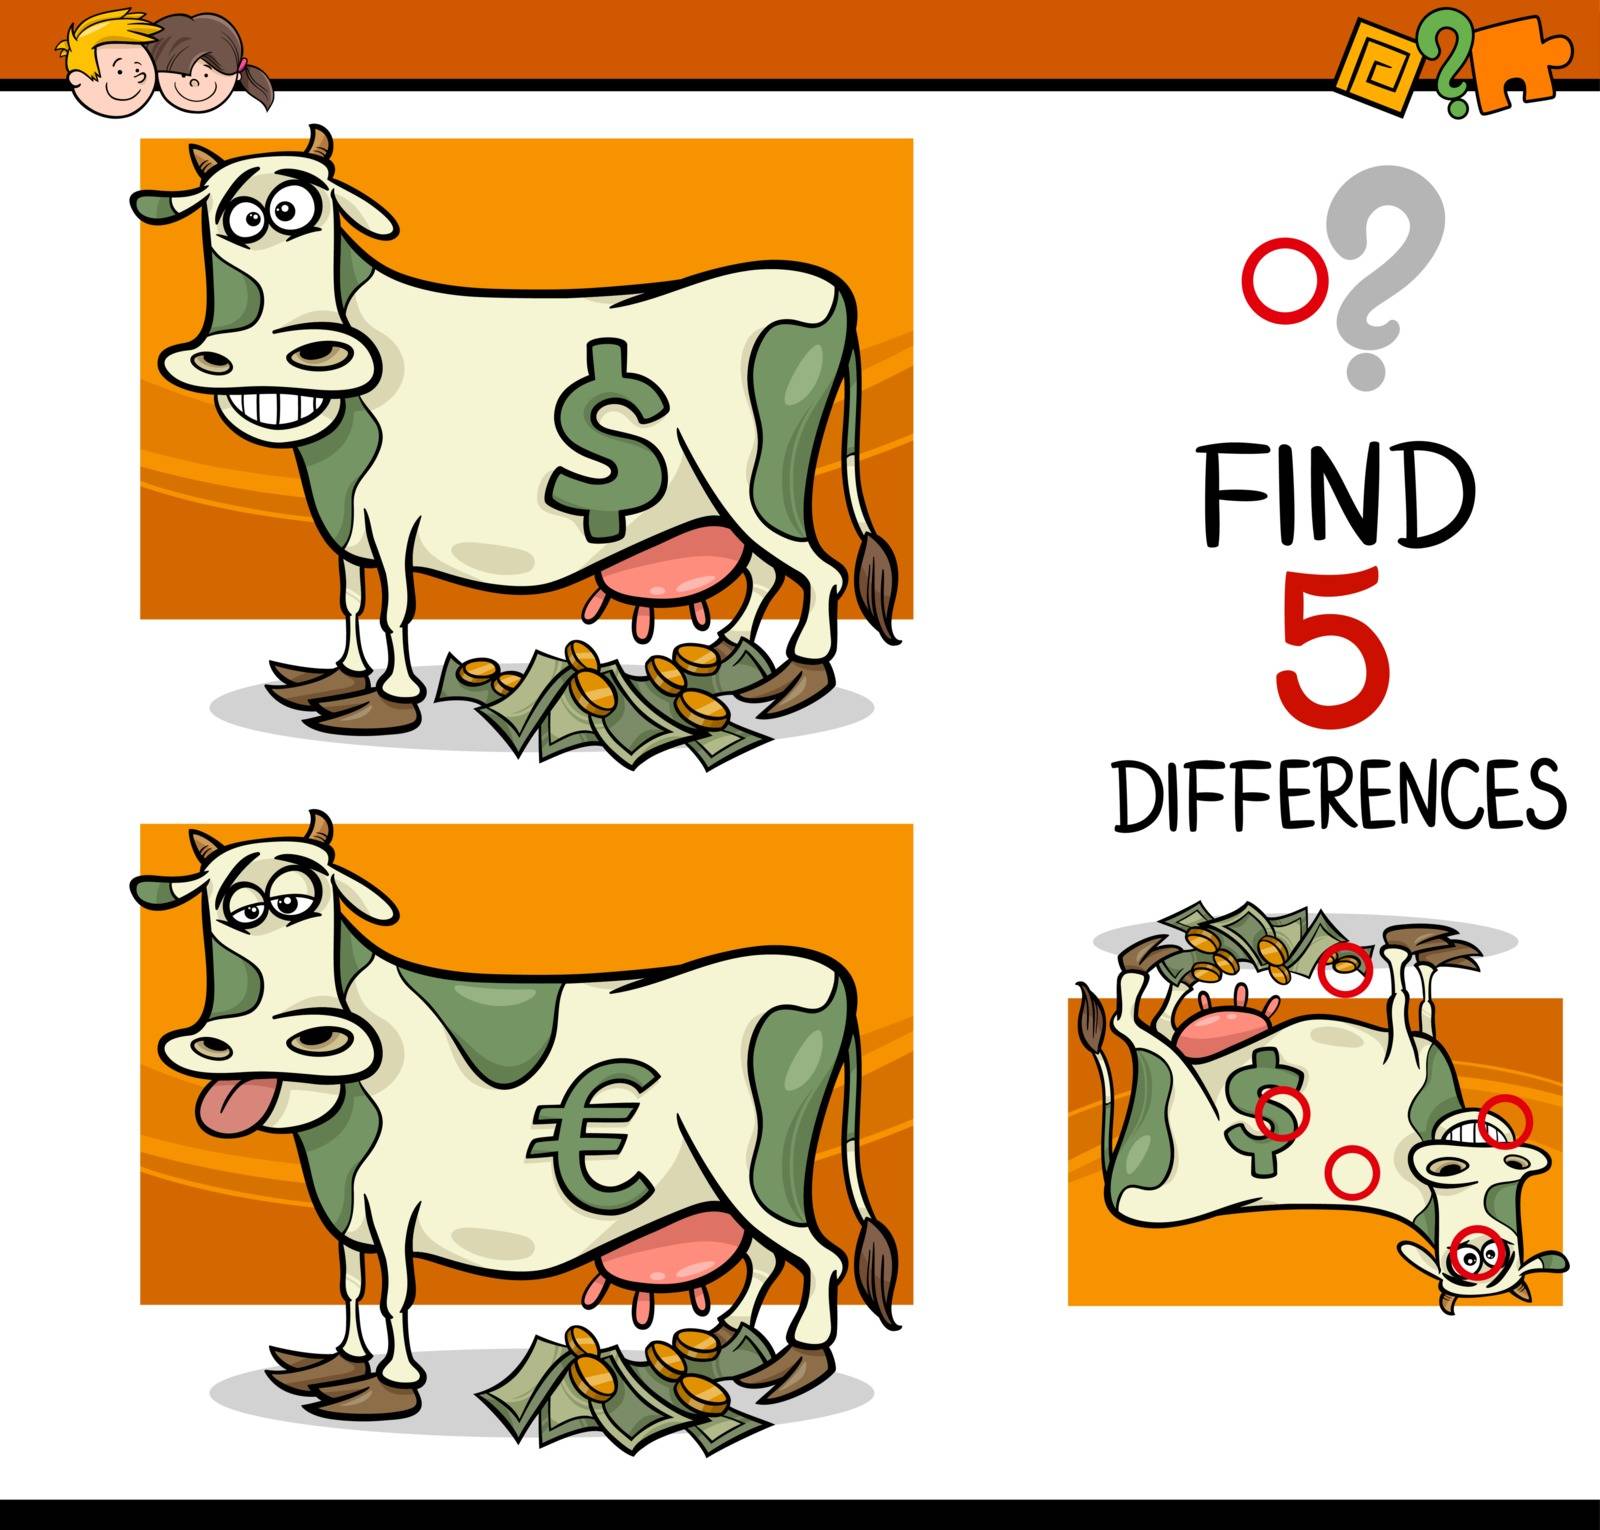 Cartoon Illustration of Finding Differences Educational Activity Task for Preschool Children with Cash Cow Saying